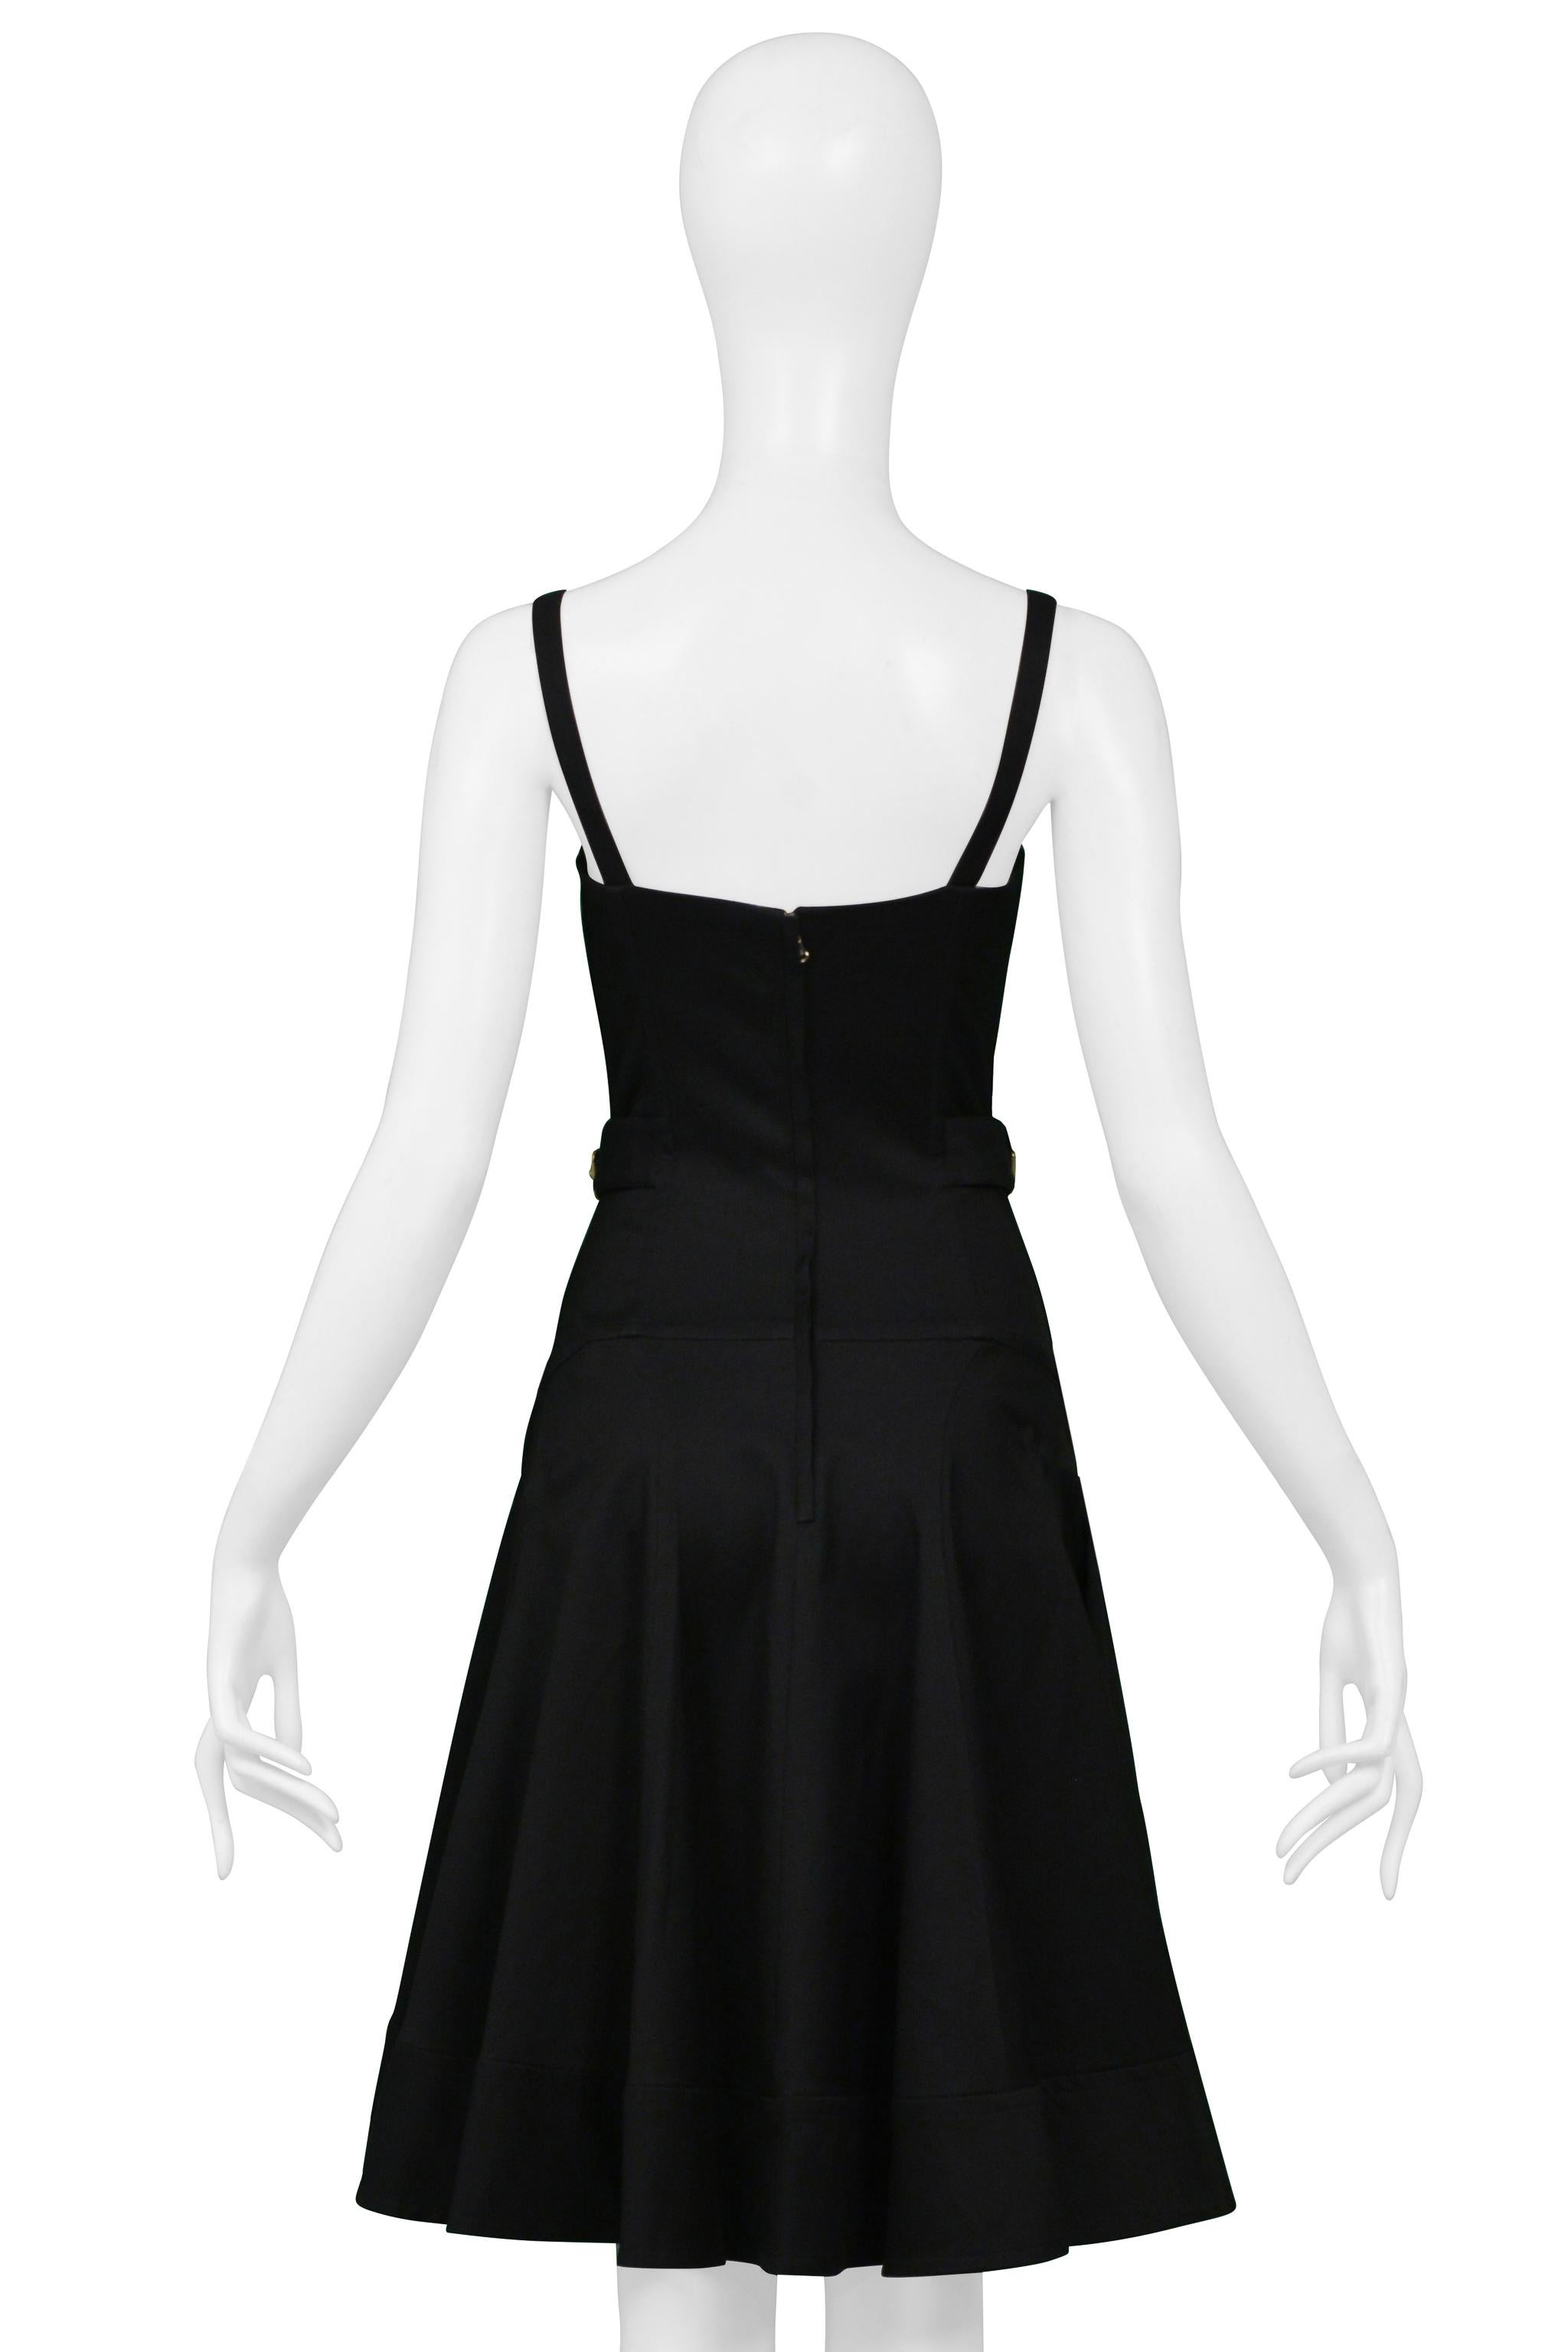 Docle & Gabbana Black Corset Dress With Buckles For Sale 3